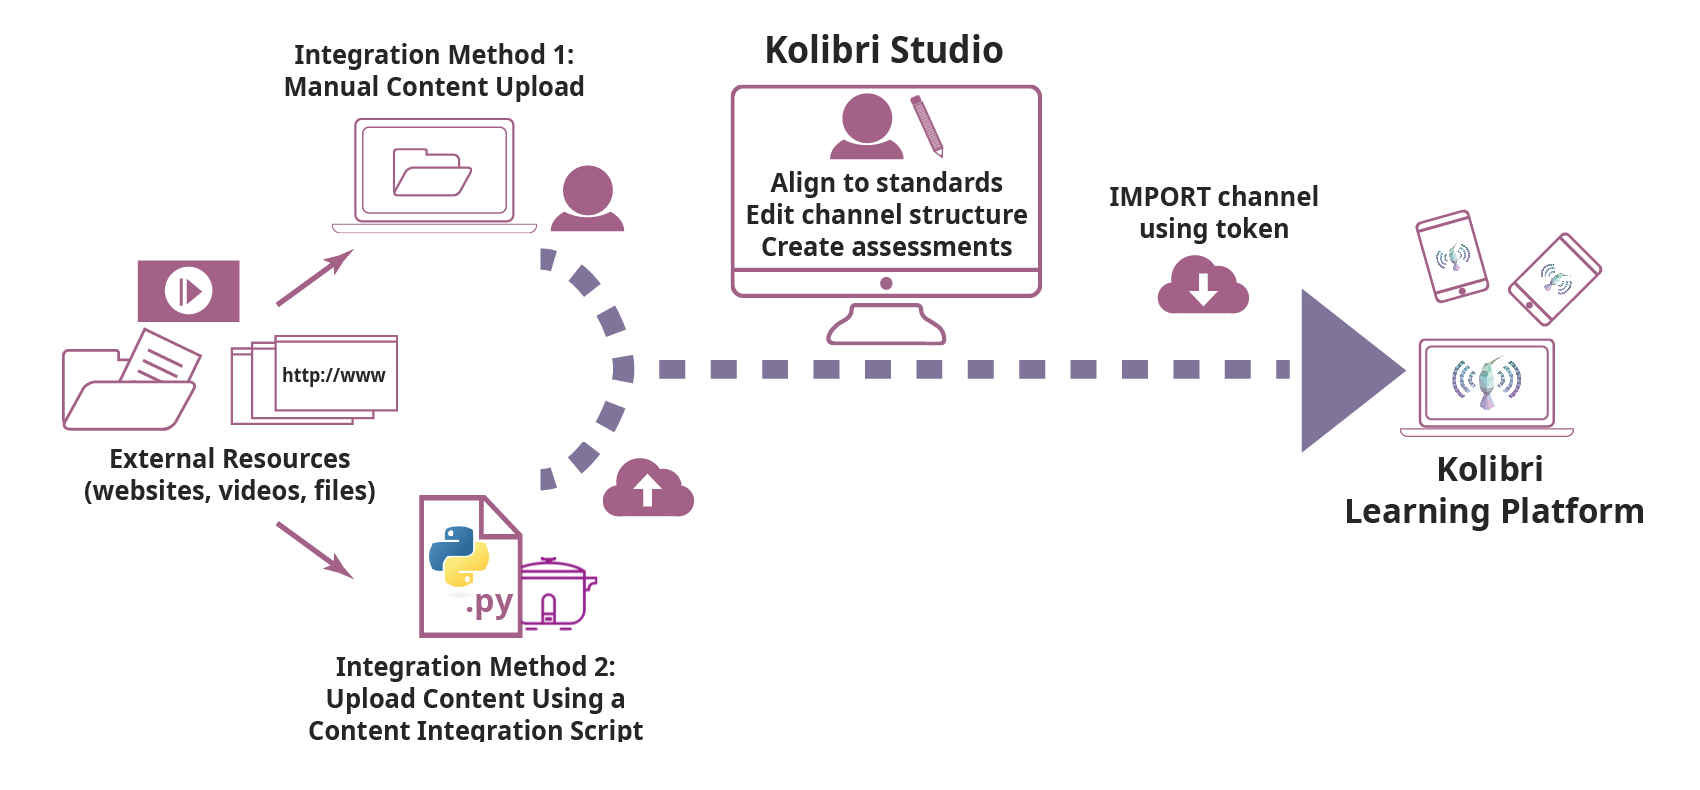 Overview of steps for integrating external content sources for use in the Kolibri Learning Platform.